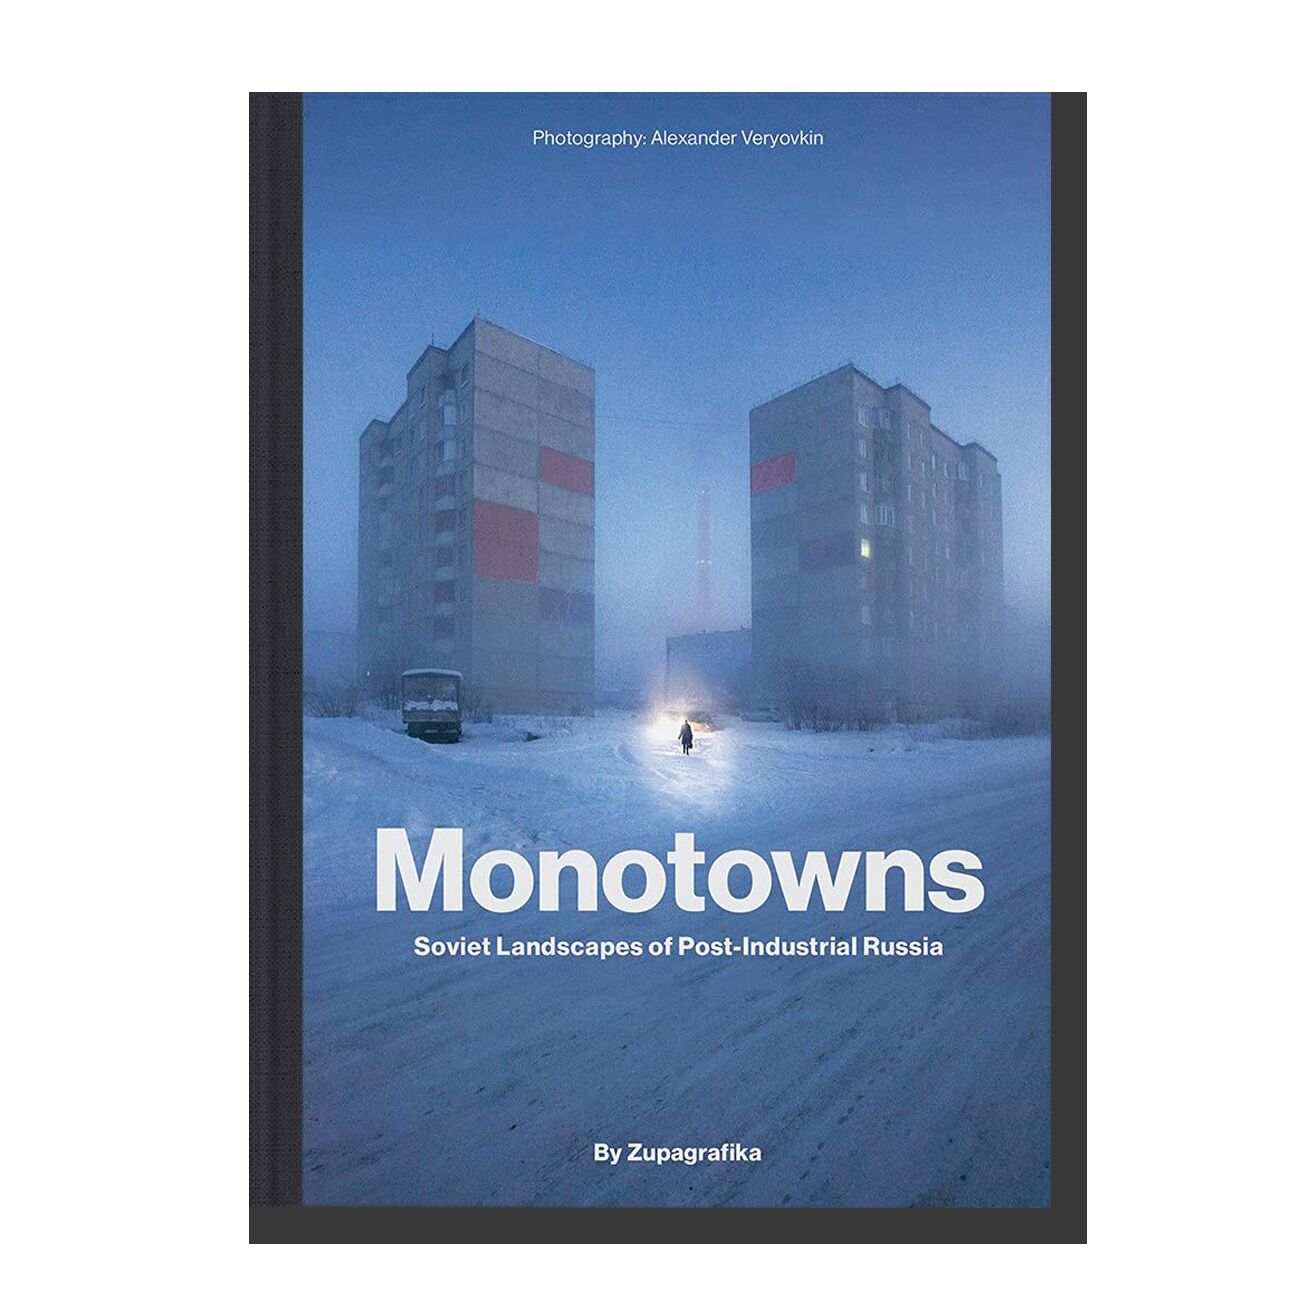 Monotowns: Soviet Landscapes of Post-Industrial Russia